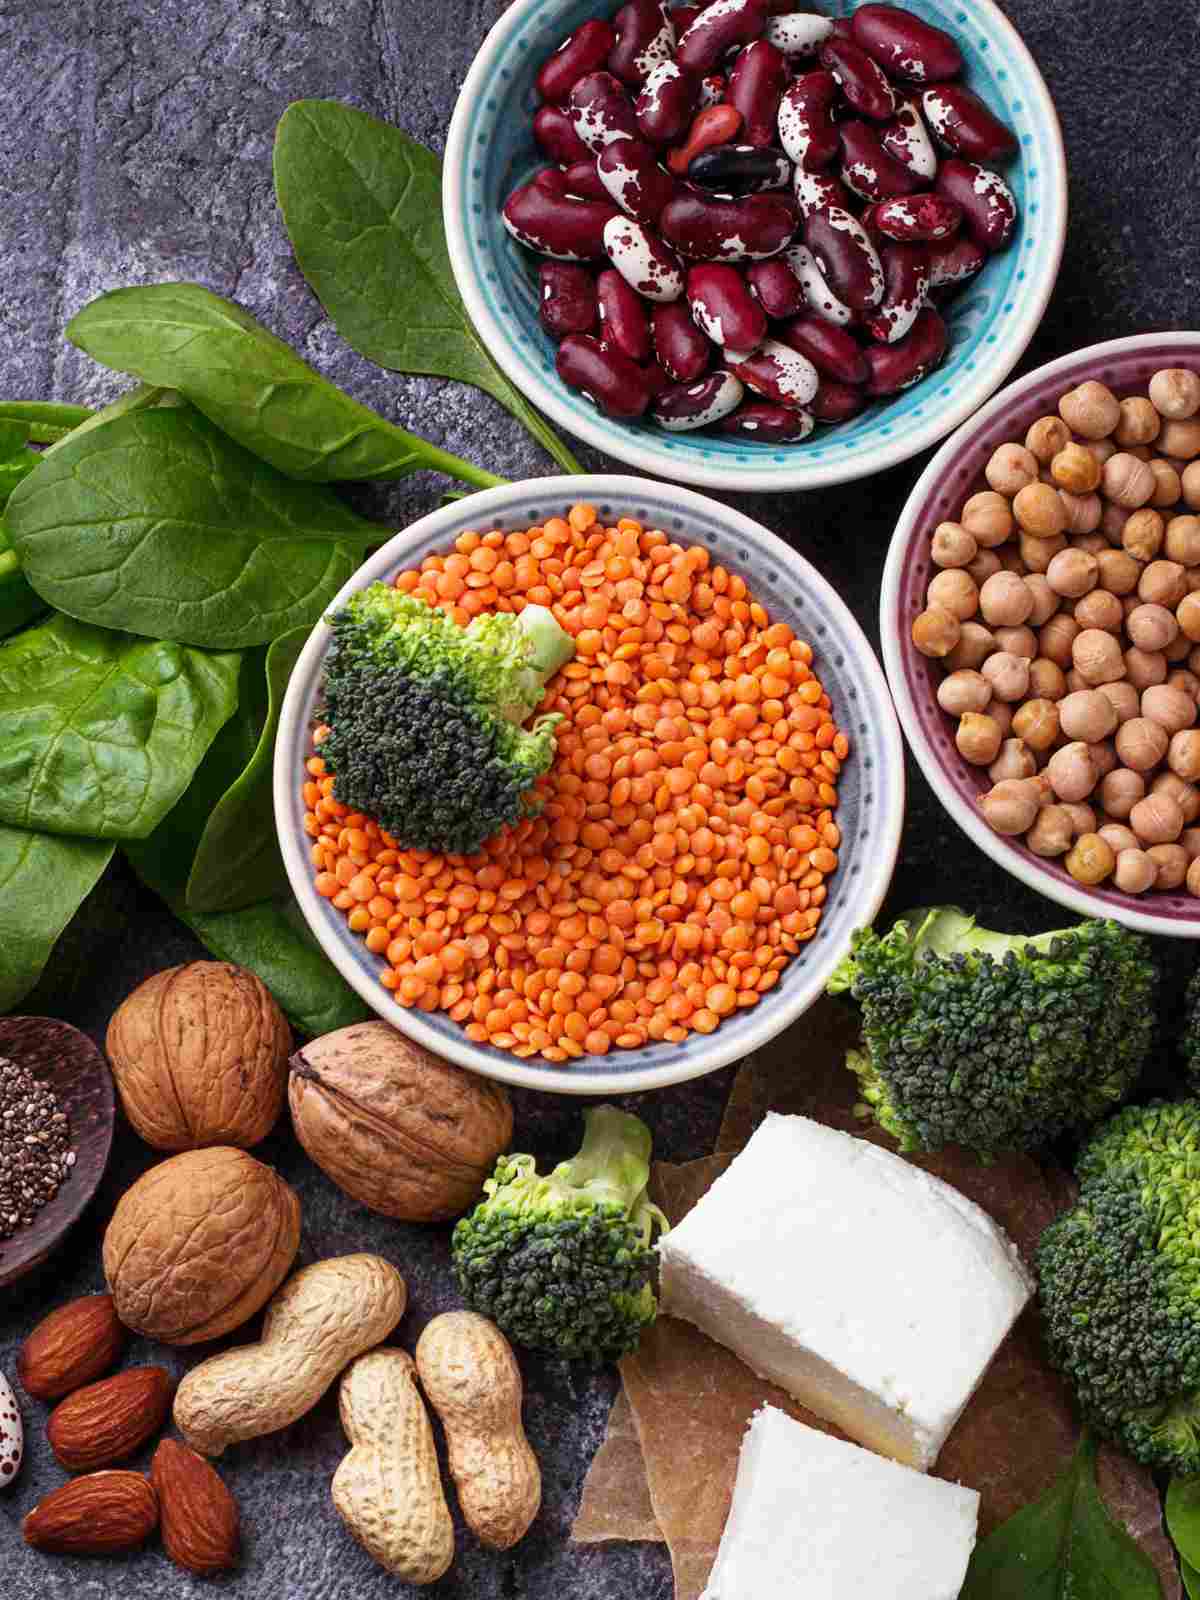 vegetarian sources of protein